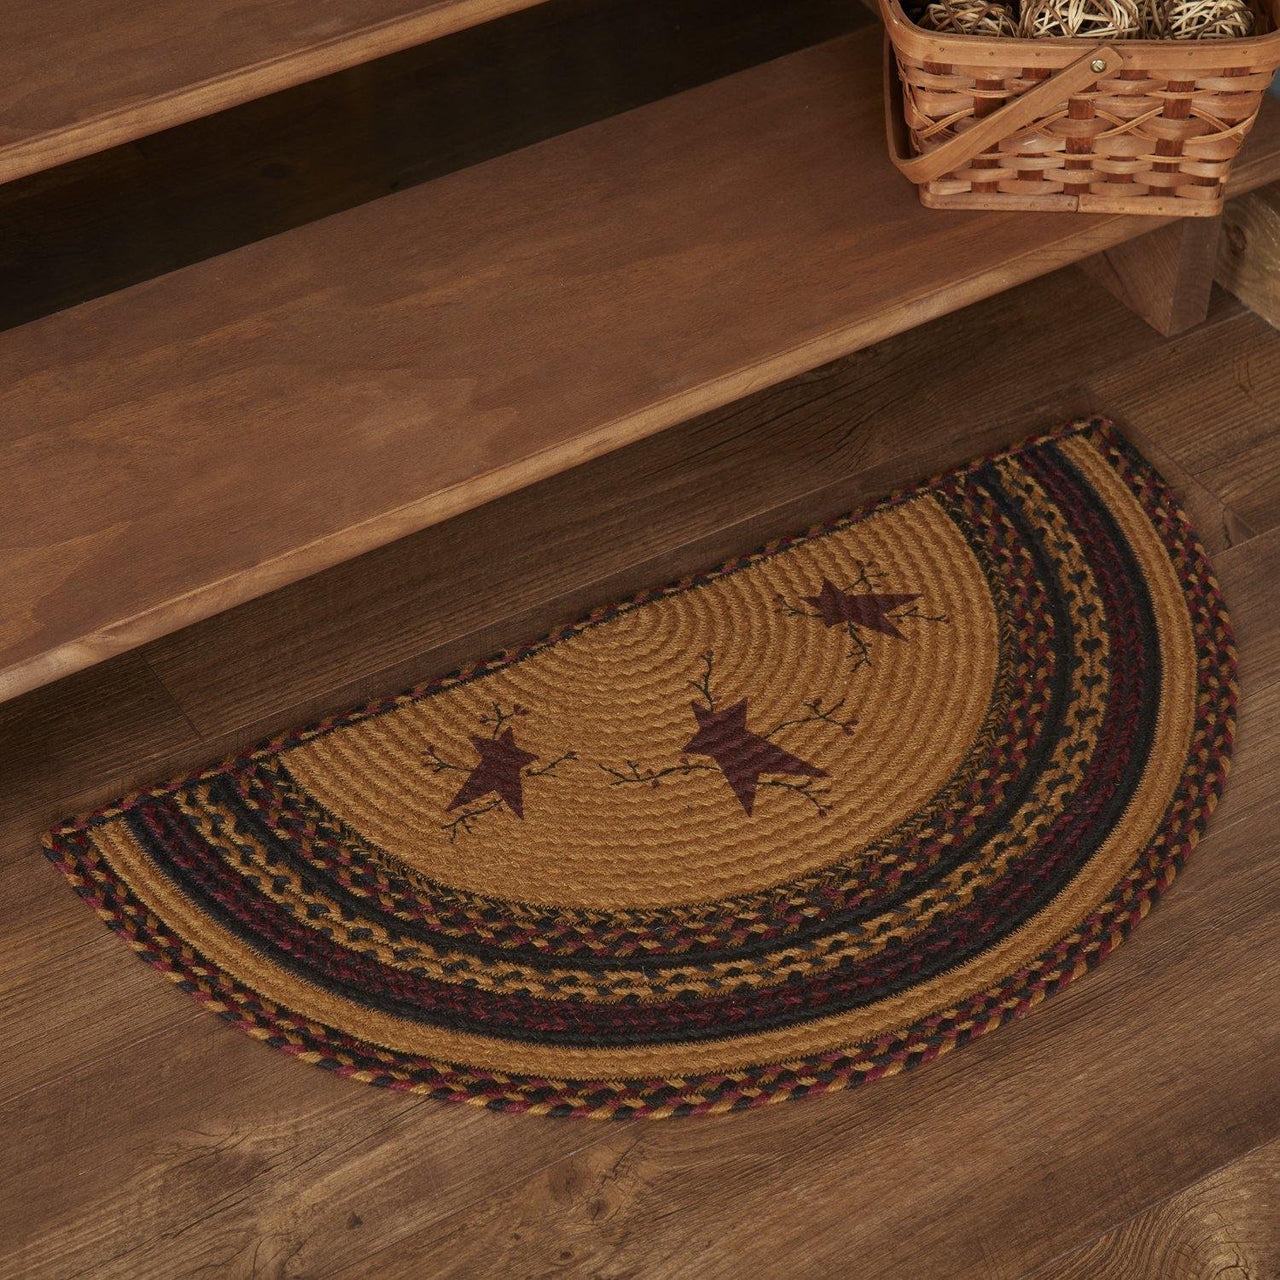 Heritage Farms Star and Pip Jute Braided Rug Half Circle 16.5"x33" with Rug Pad VHC Brands - The Fox Decor